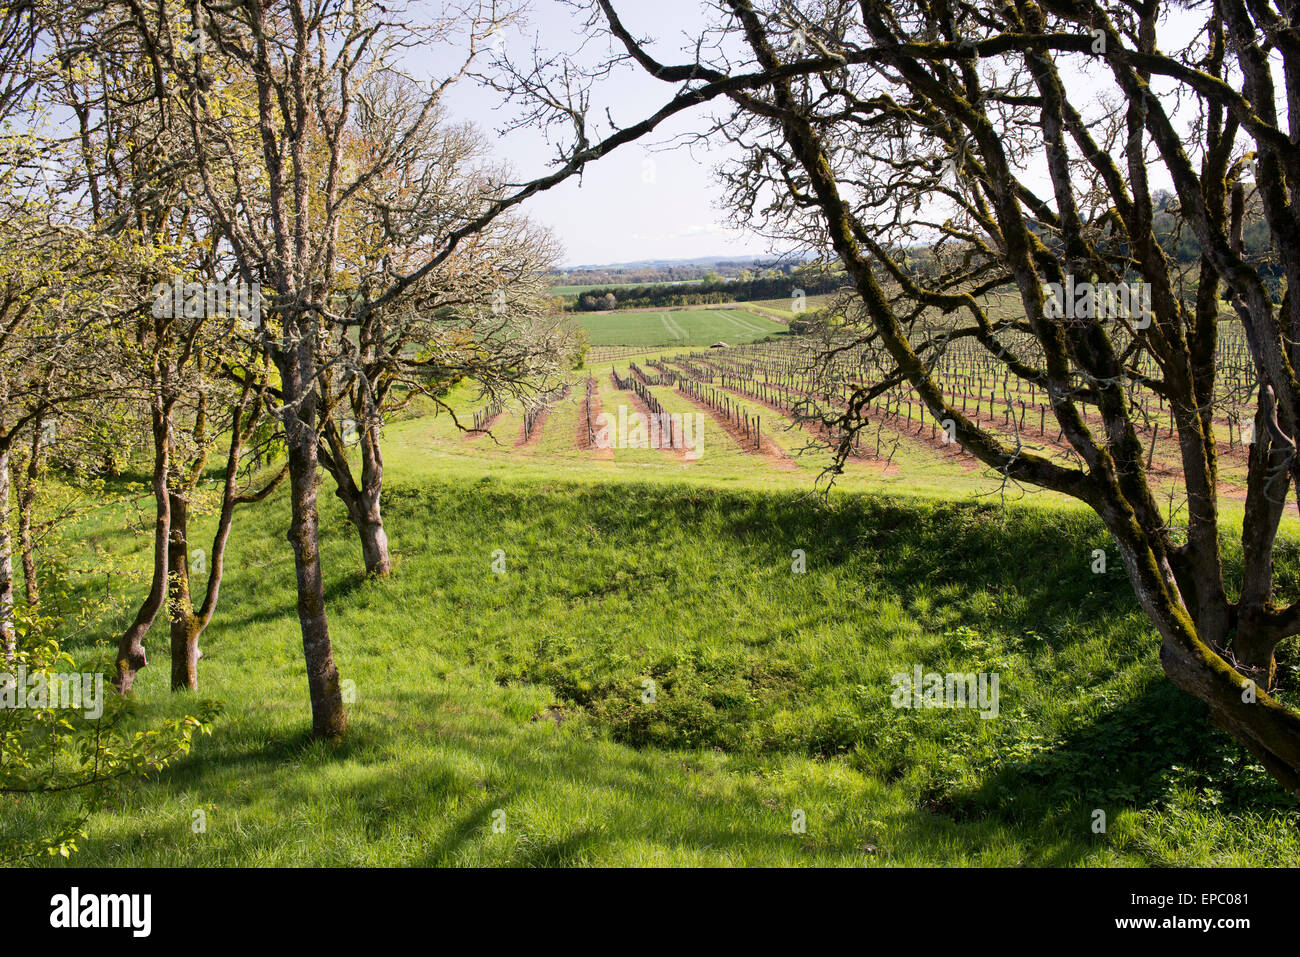 Rolling fields of vines at Yamhill Valley Vineyards in the Willamette Valley near McMinnville, Oregon. Stock Photo